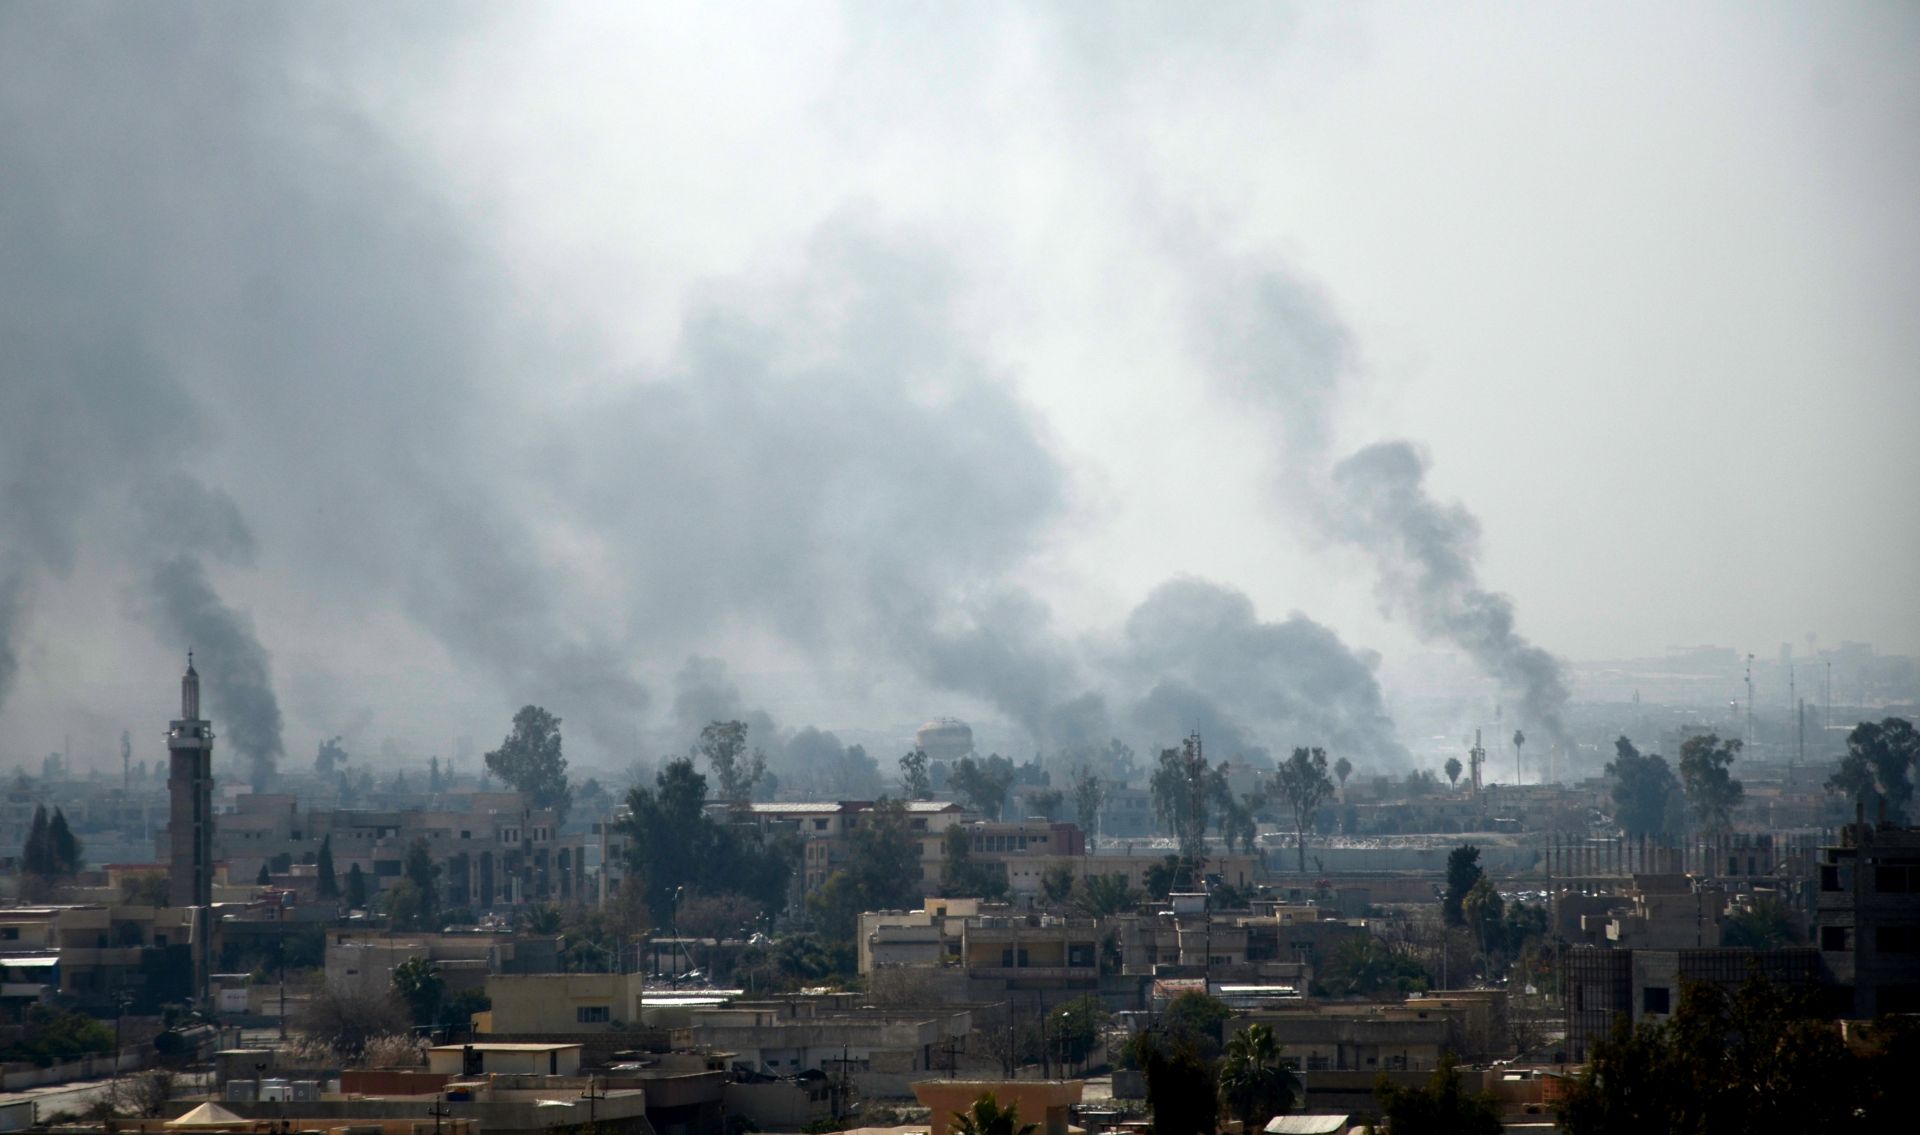 epa05812803 A general view for smoke clouds rising from the western part of Mosul city, Iraq, 24 February 2017. Iraqi military forces on 18 February started an offensive to regain control over the Western part of Mosul city from the Islamic State (IS). The eastern half of the city was completely liberated from the IS militants at the end of January.  EPA/STR